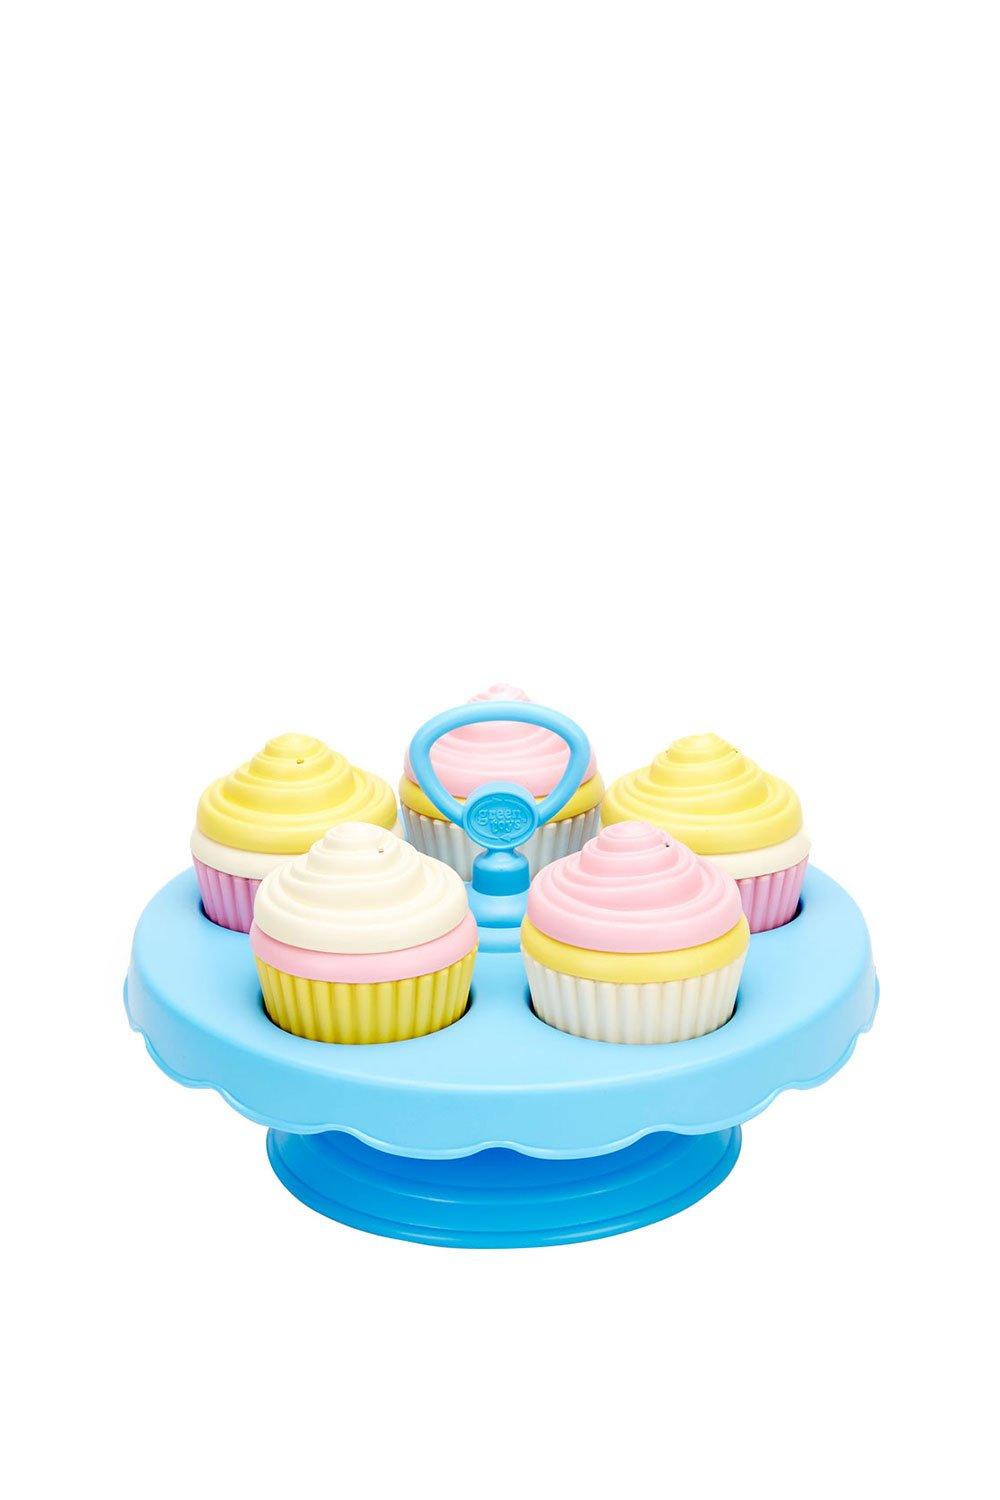 Toy Cupcakes